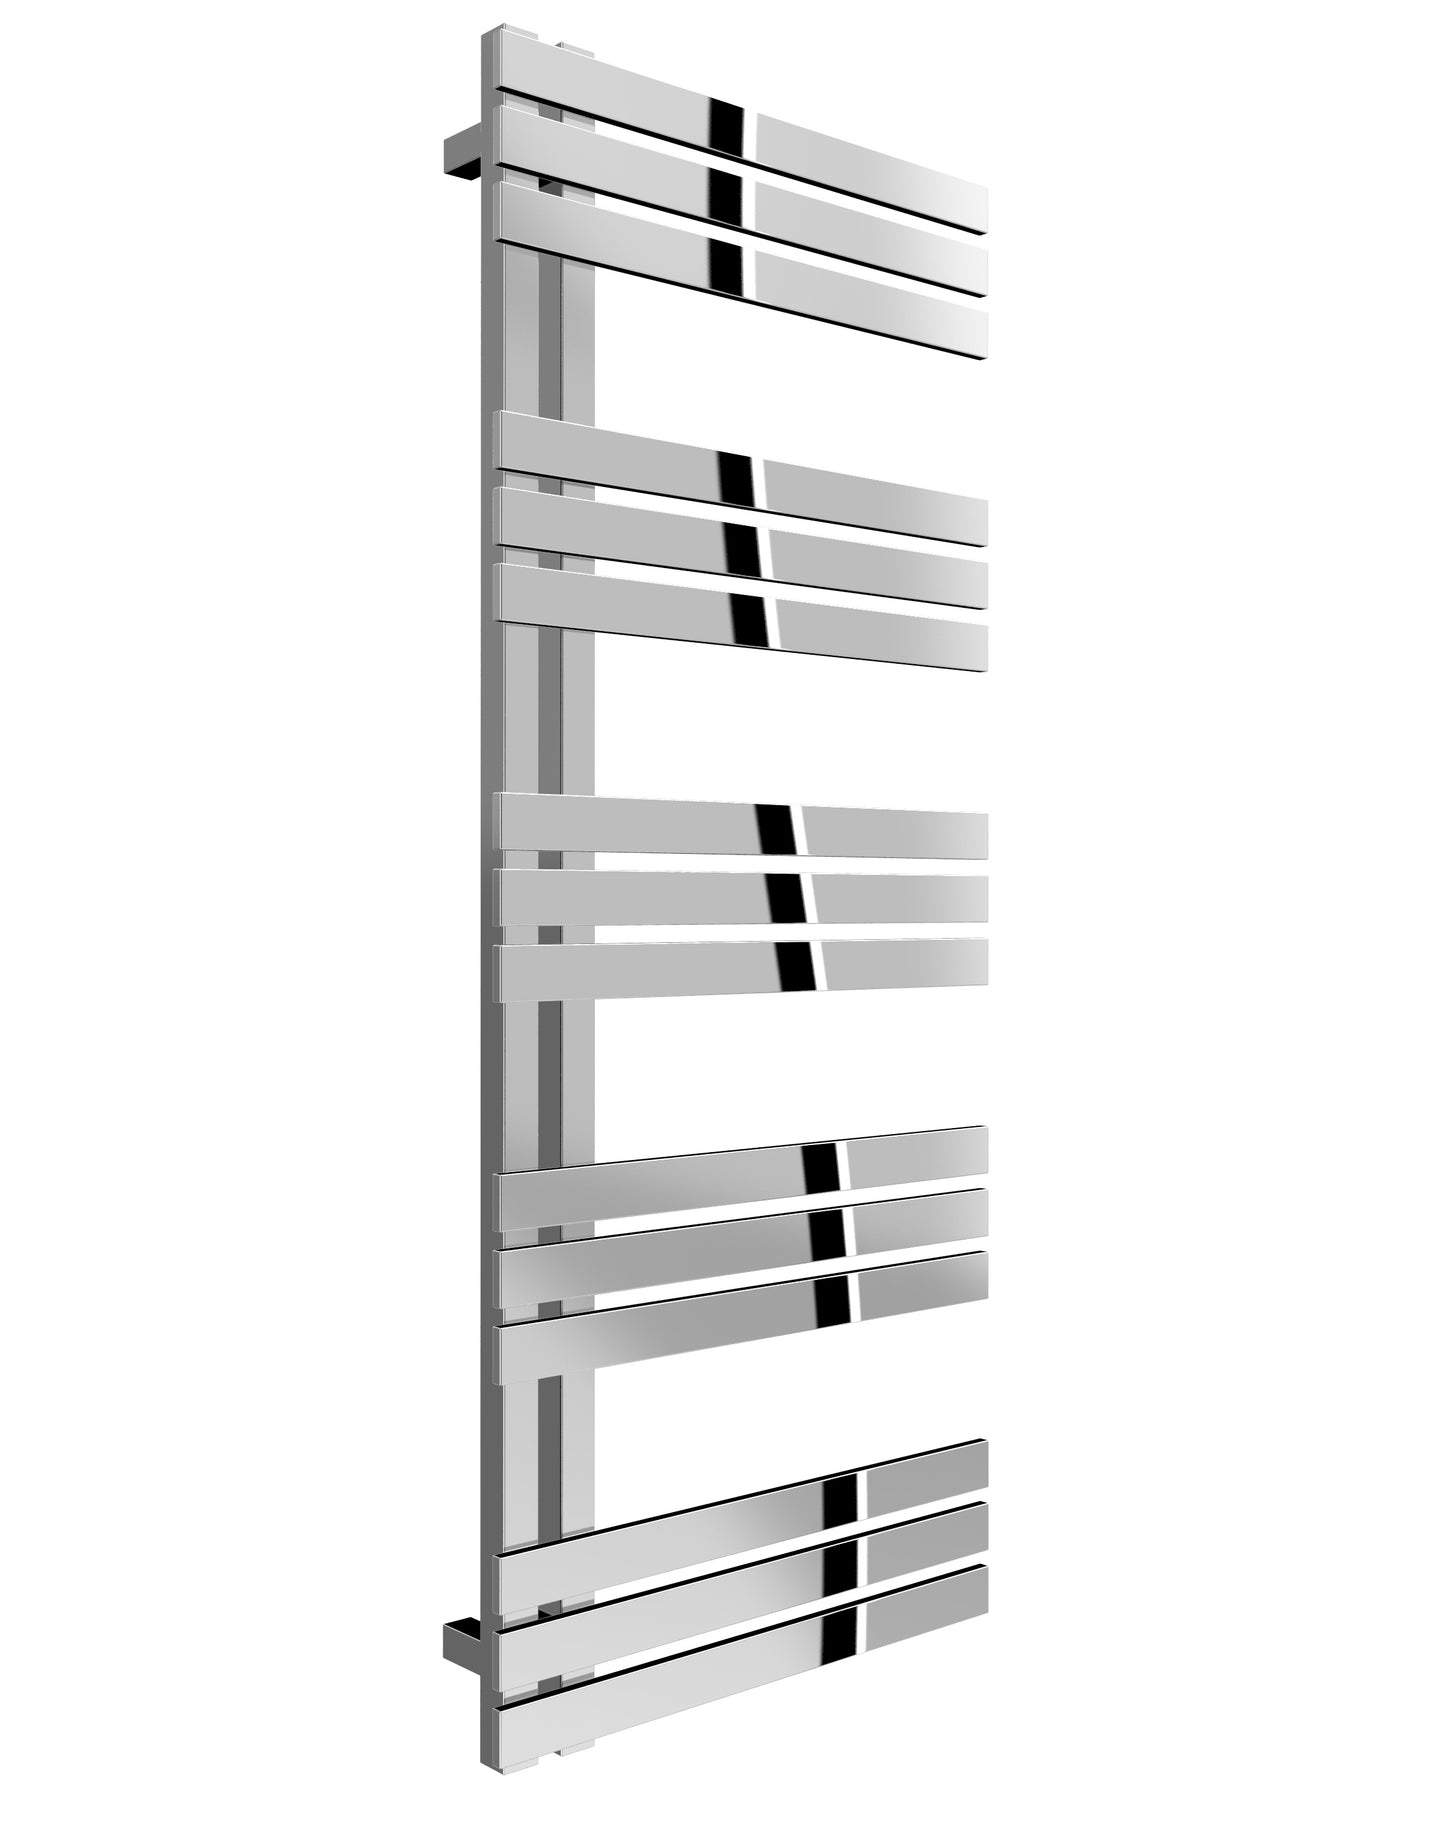 Lovere Stainless Steel Heated Towel Rail - Various Sizes - Polished Stainless Steel